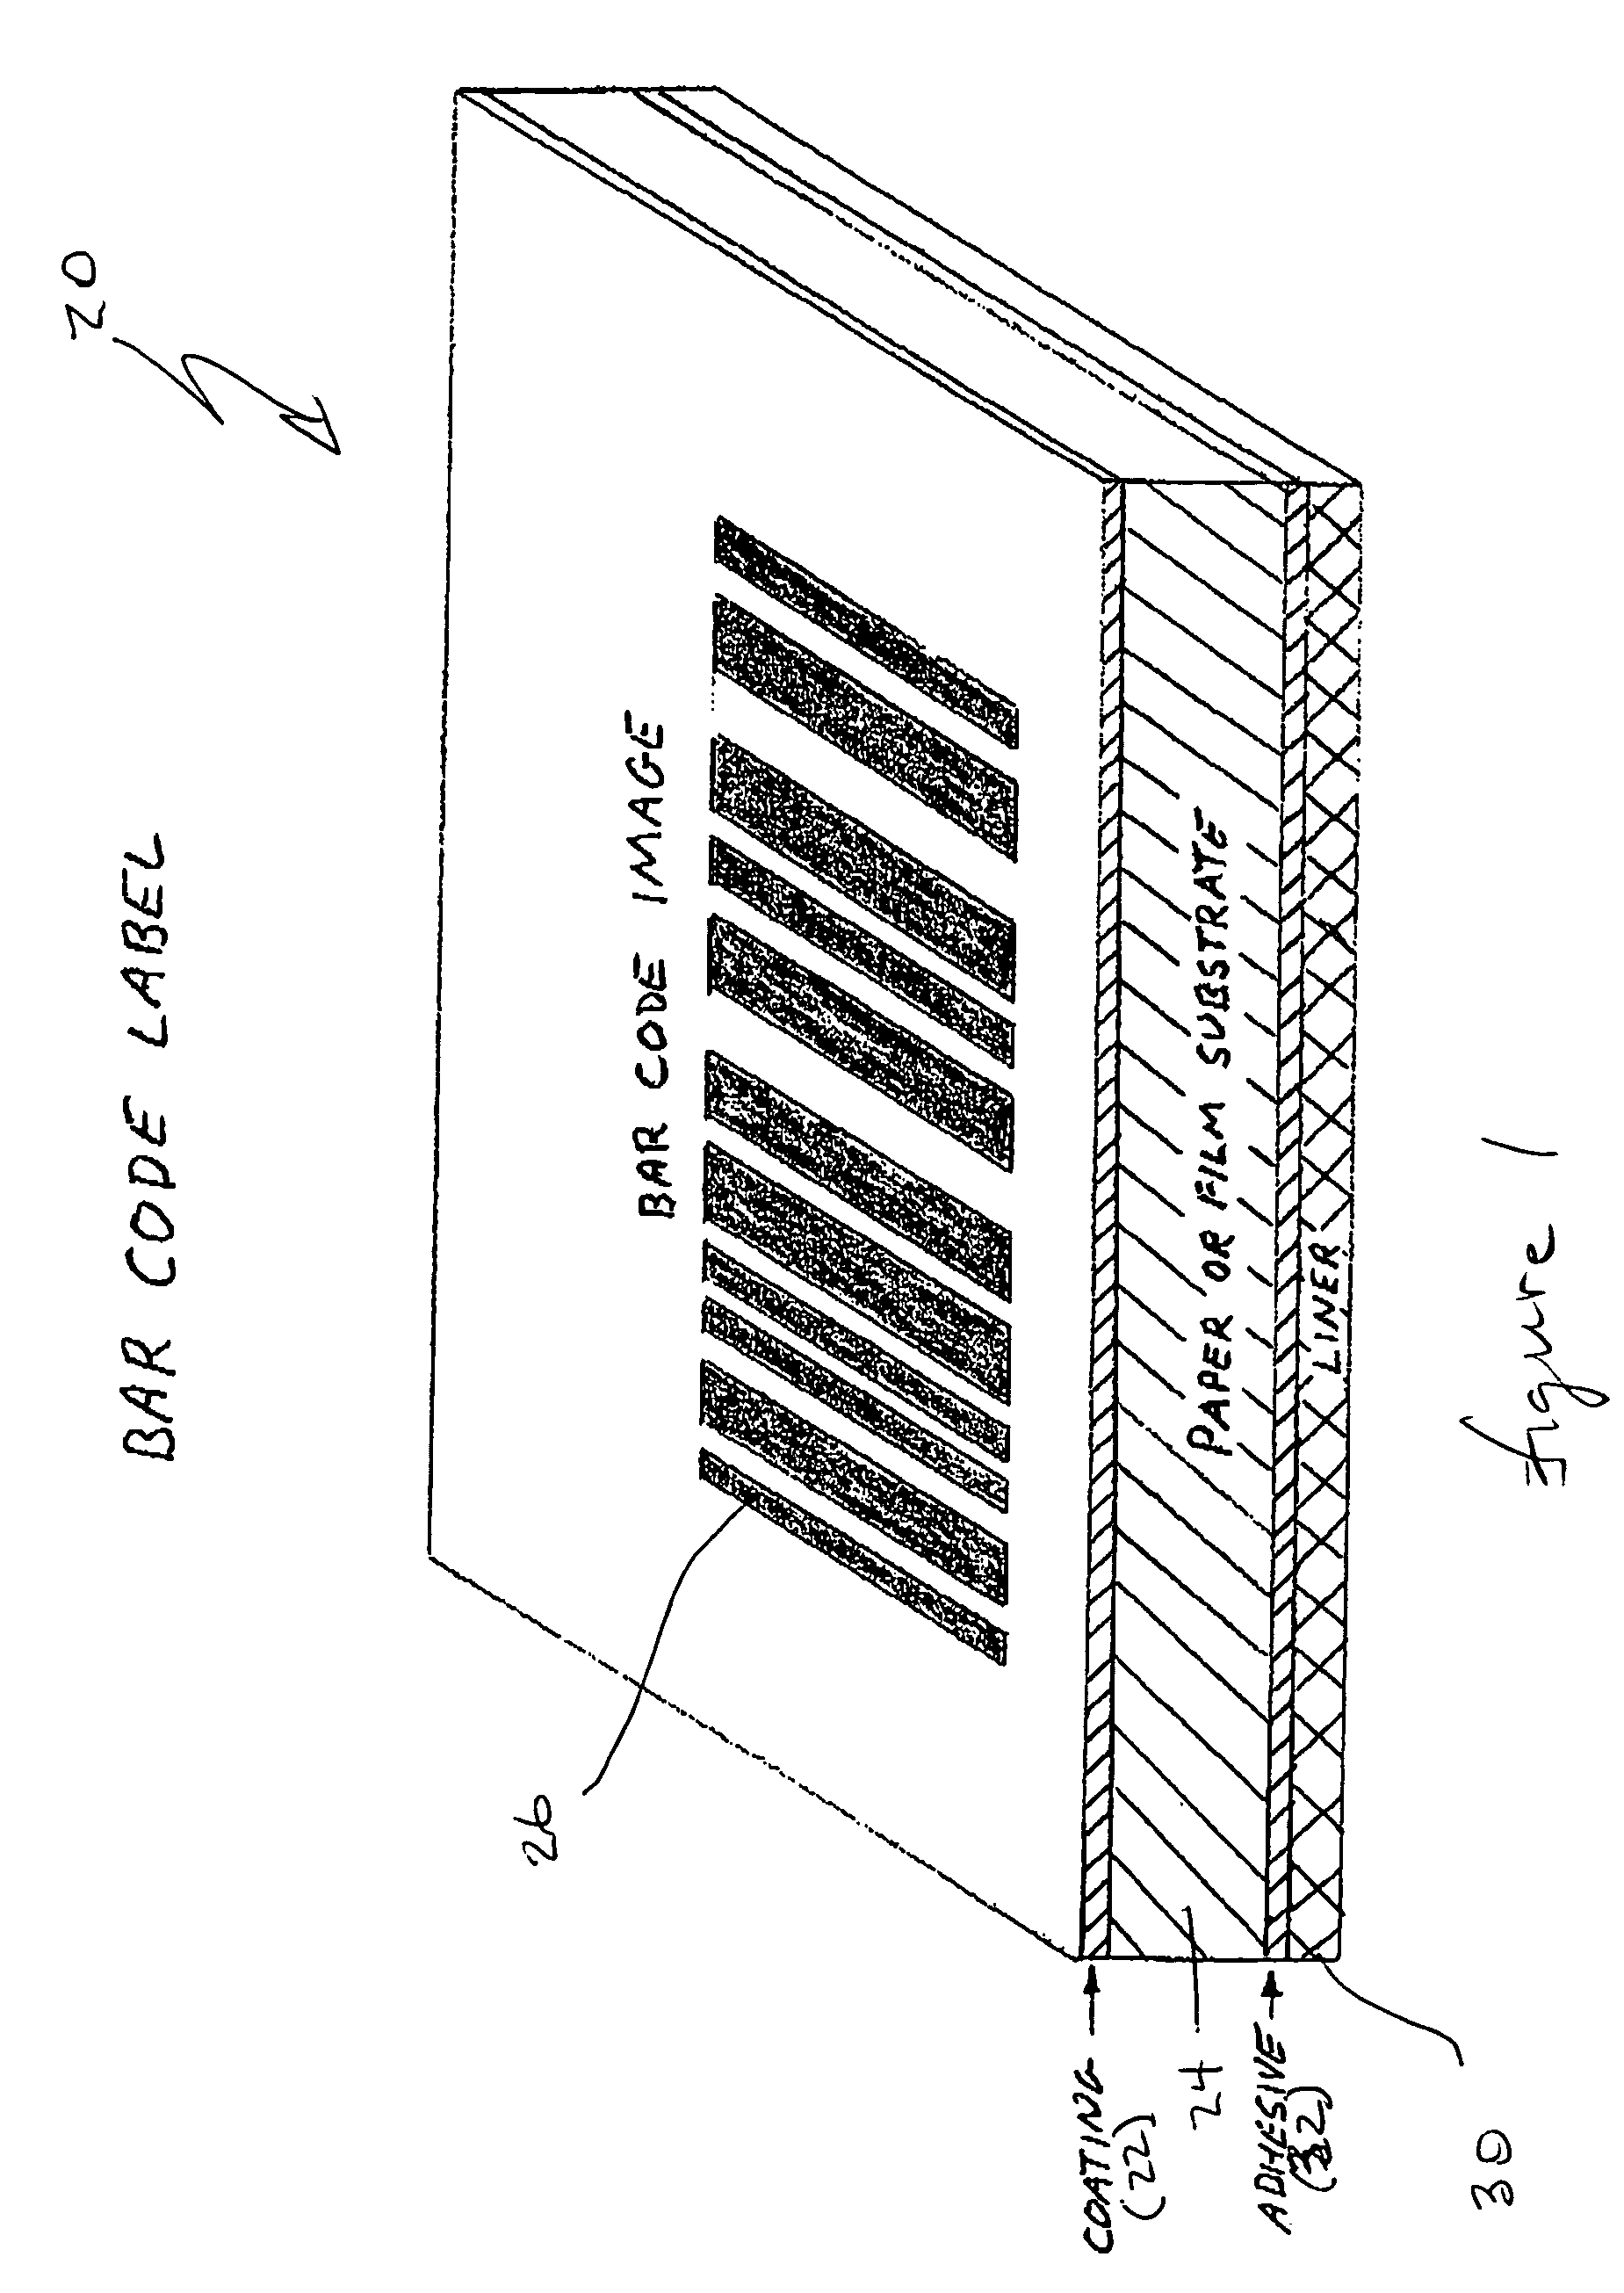 Method for making and a business form having printed bar codes on a coated substrate